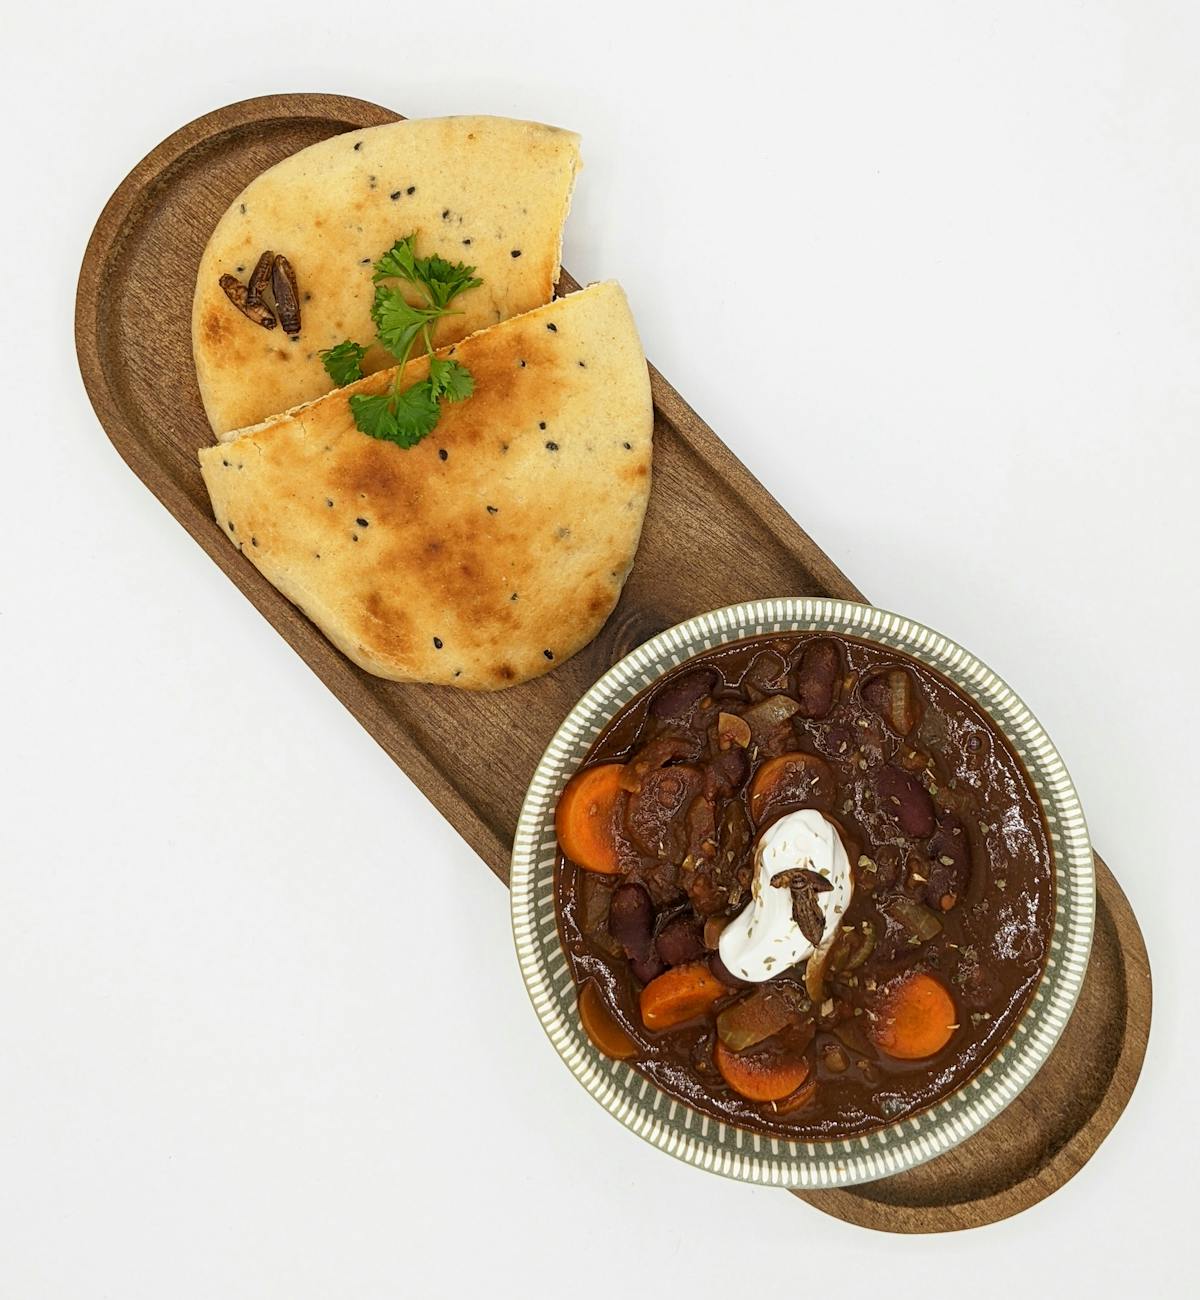 Serve your chili con carne with fresh naan bread for a change!